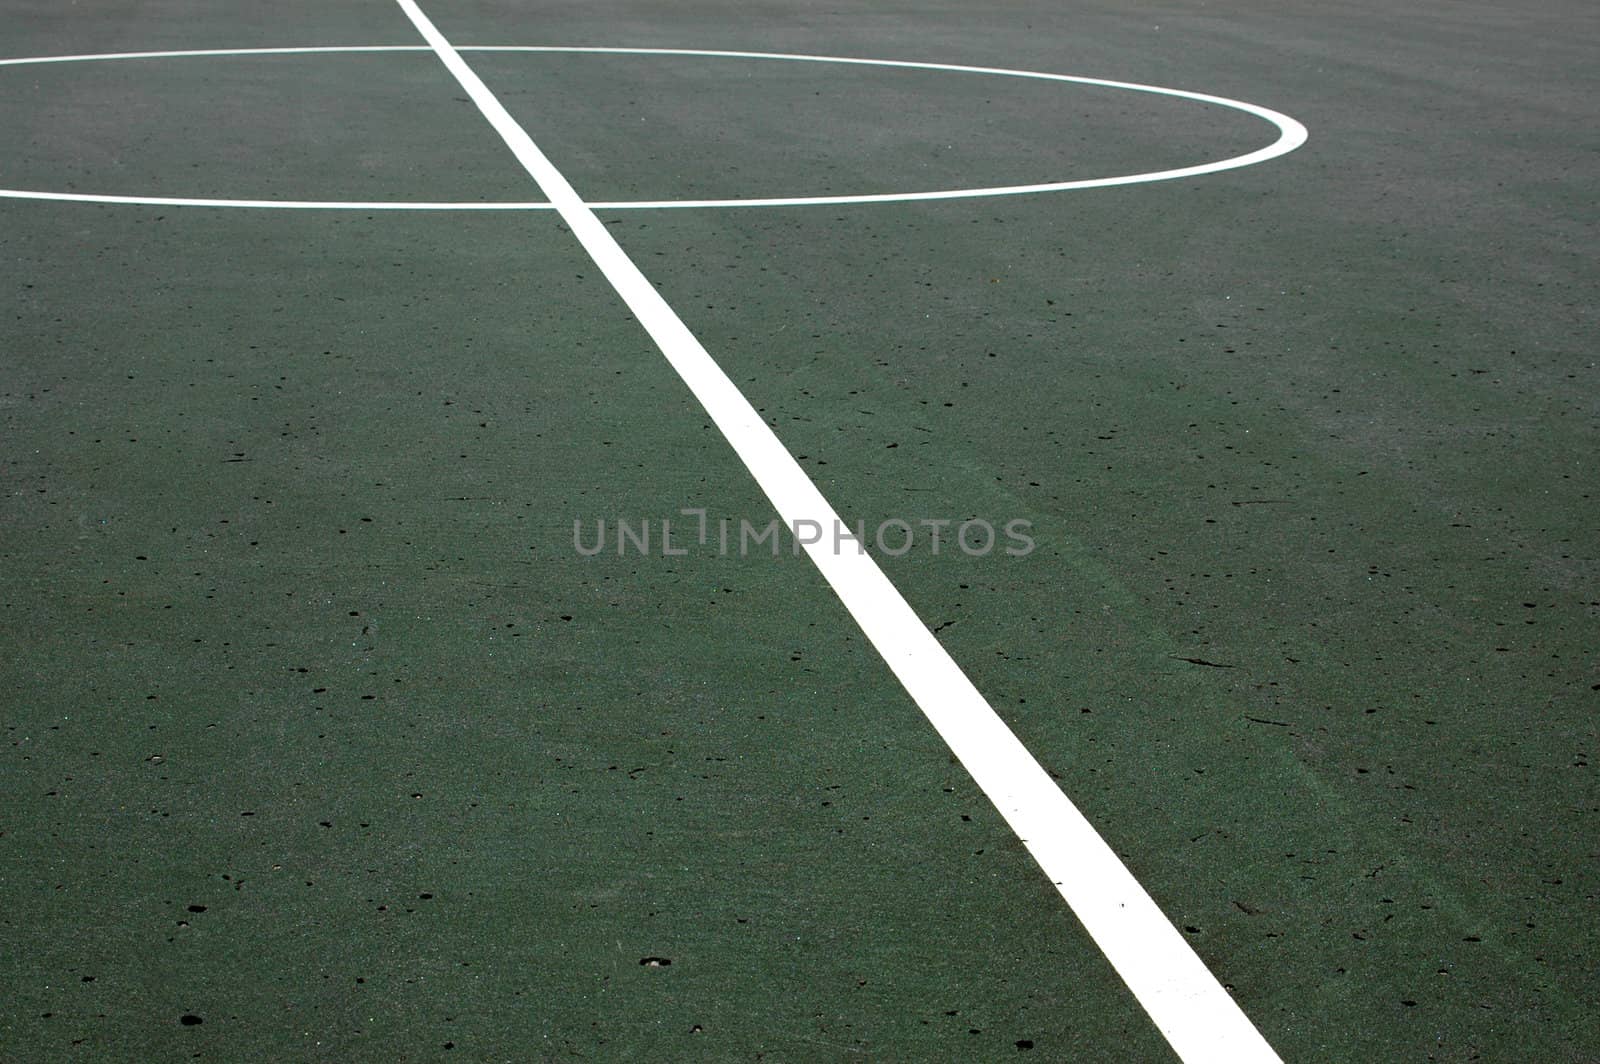 Sports image of lines on a weathered basketball court